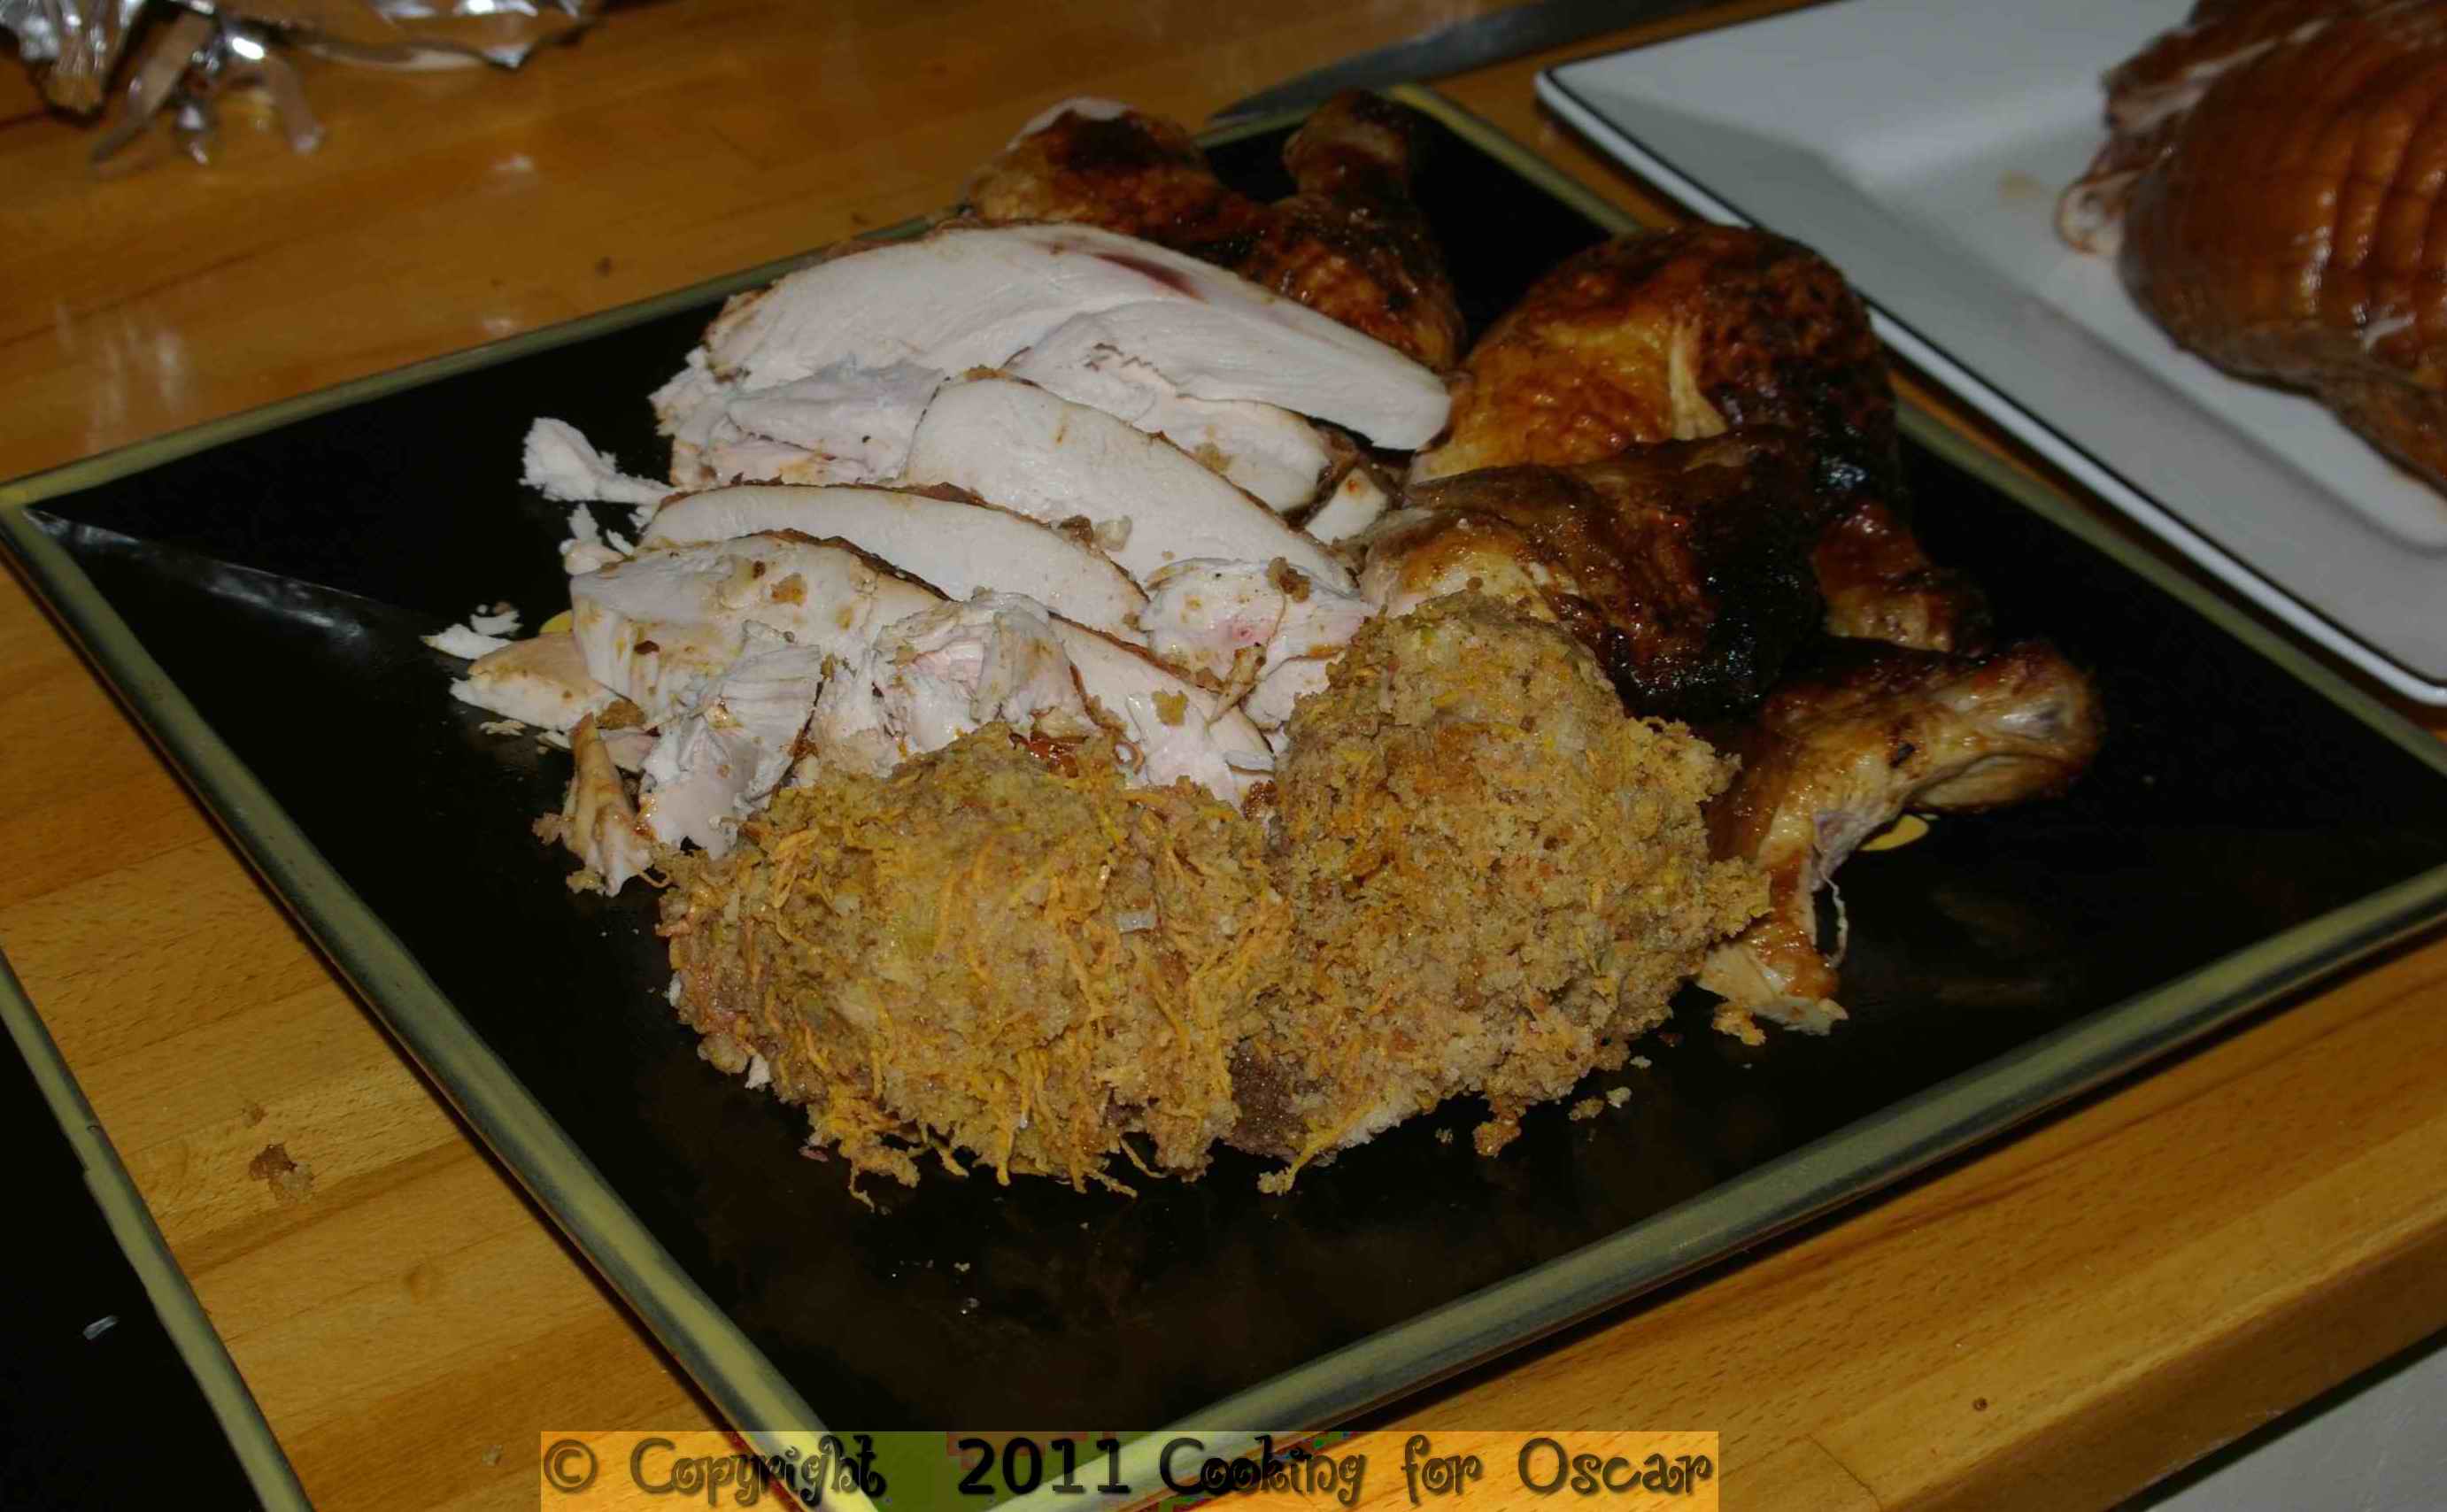 Roast Chicken with Stuffing